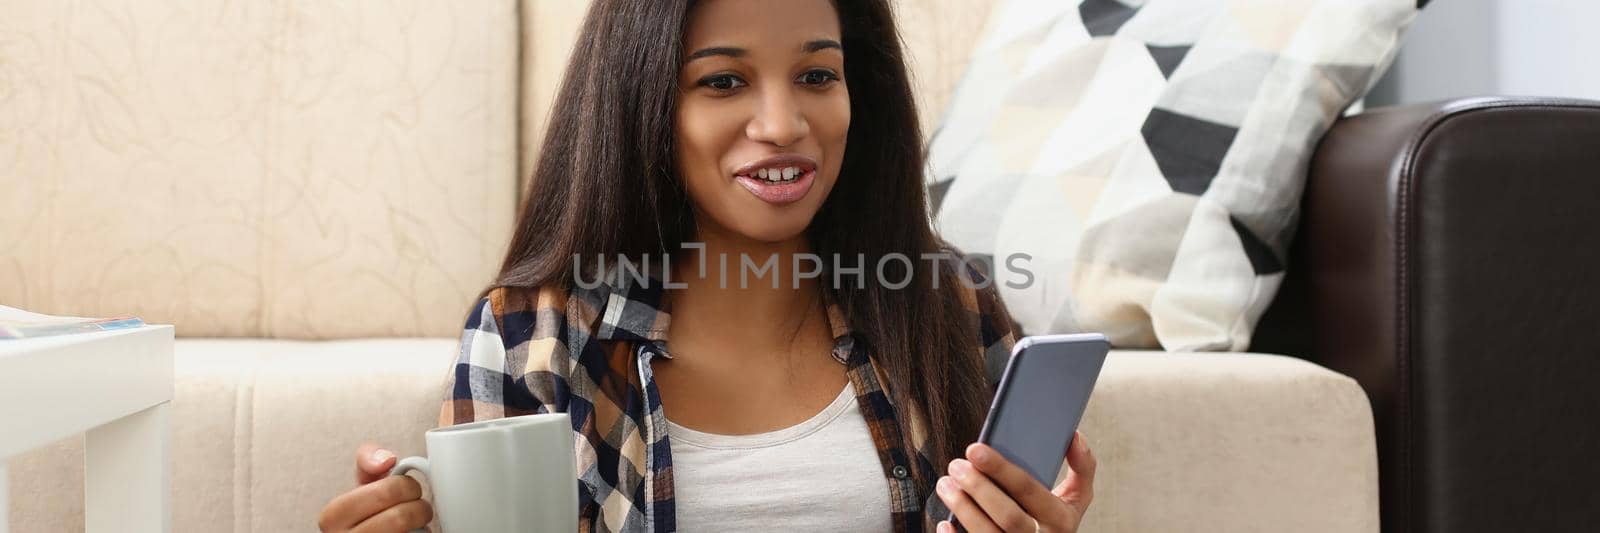 Portrait of woman surprised with end of movie, watching film online on website, open laptop on lap. Female record voice message to friend, hold smartphone in hand. Leisure, rest concept